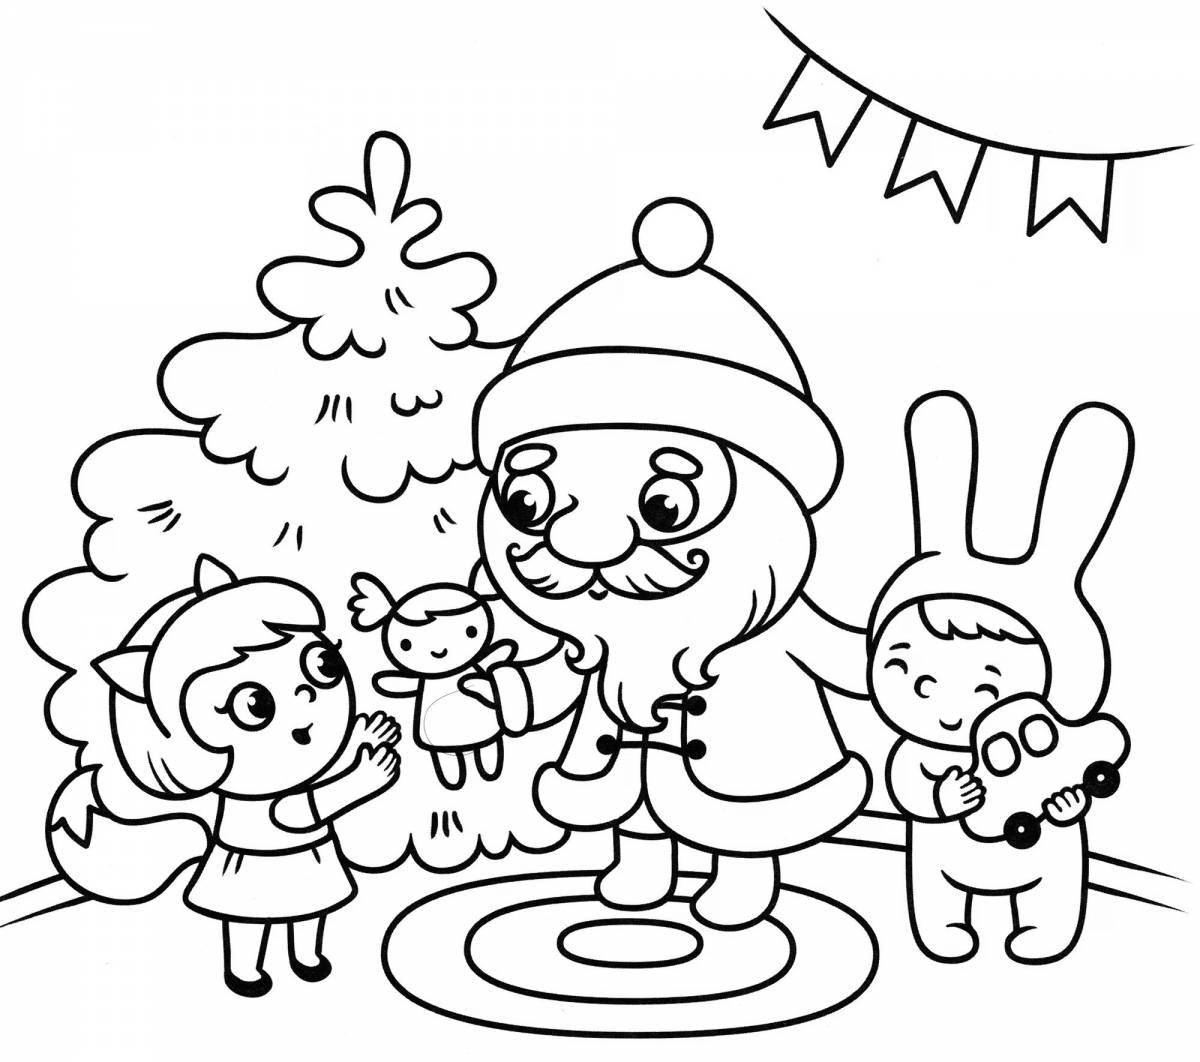 Coloring page blessed snow maiden